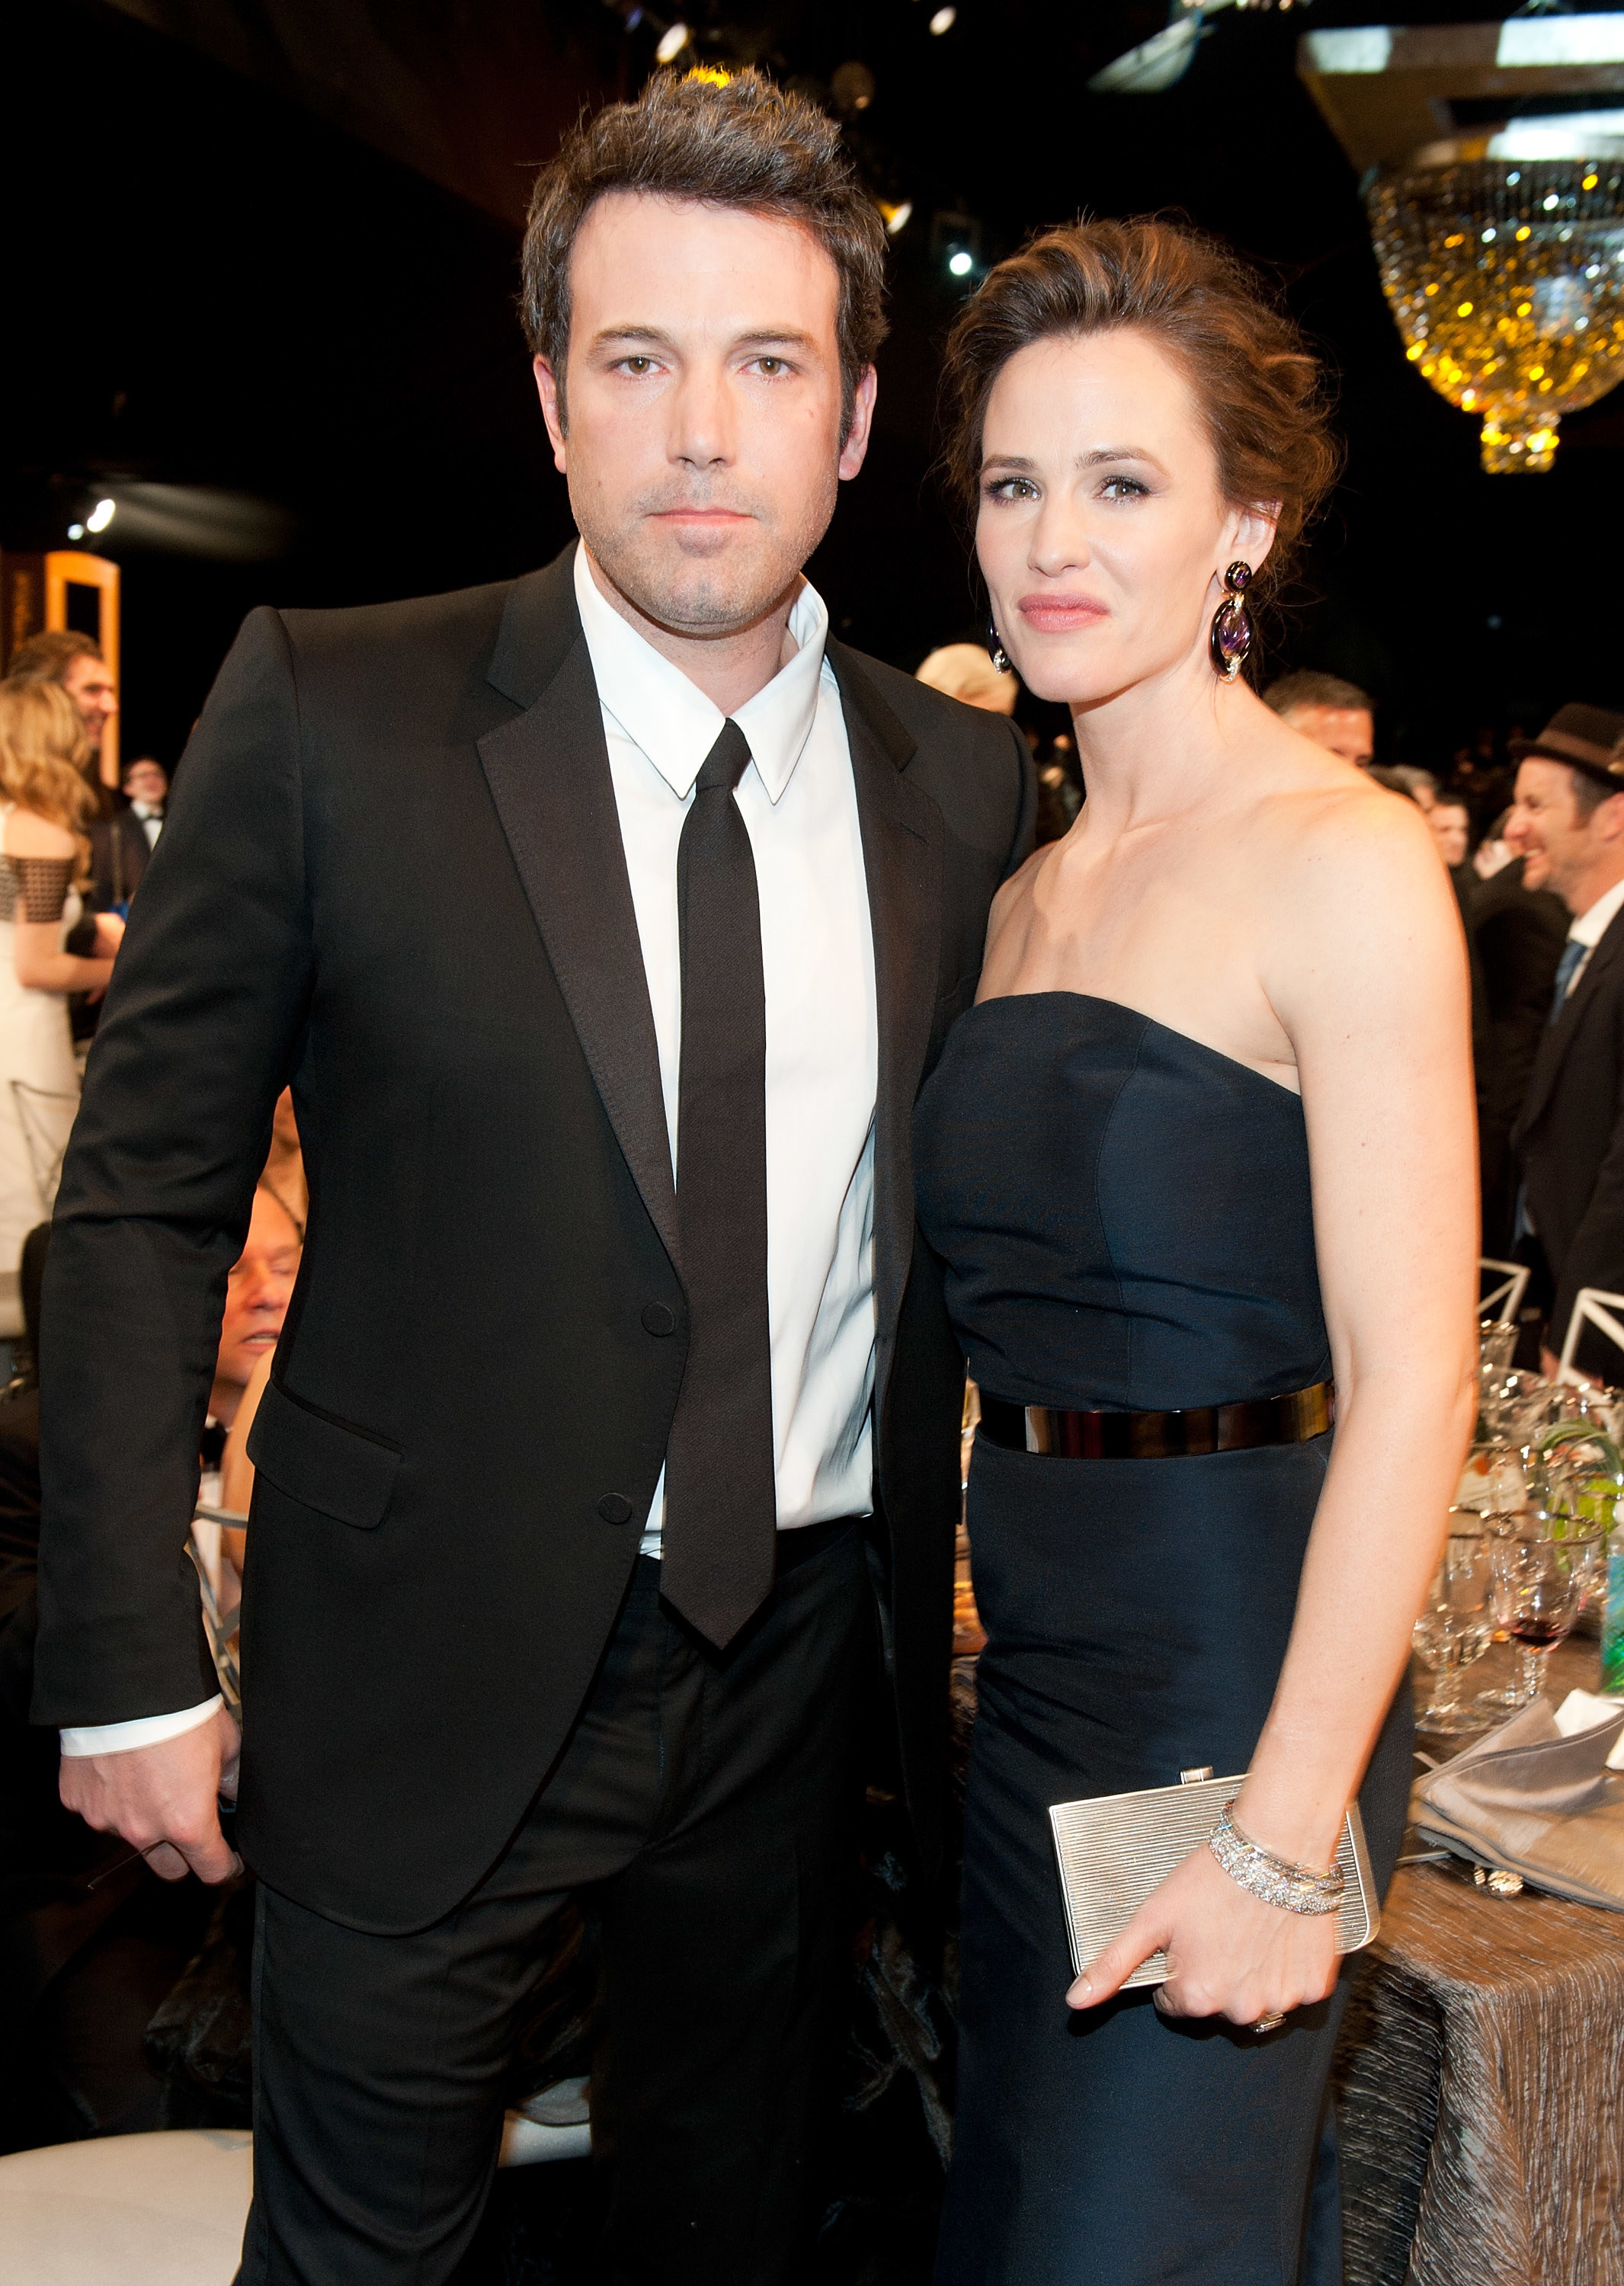 Affleck and Garner pose for a photo together at an event